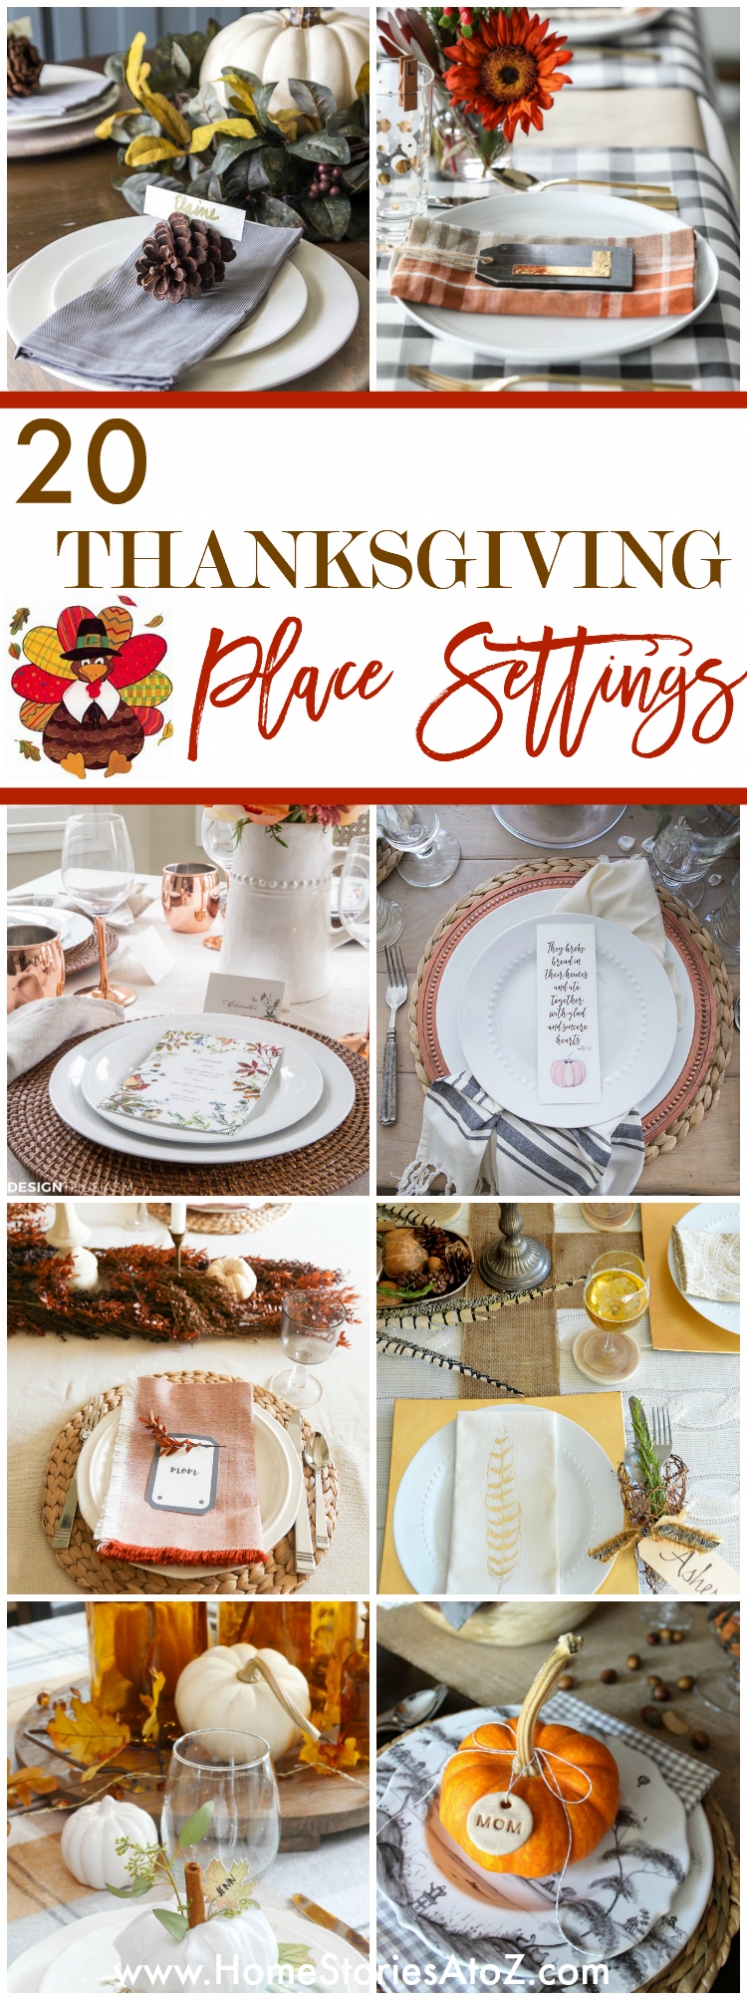 20 Thanksgiving Place Settings - Home Stories A to Z